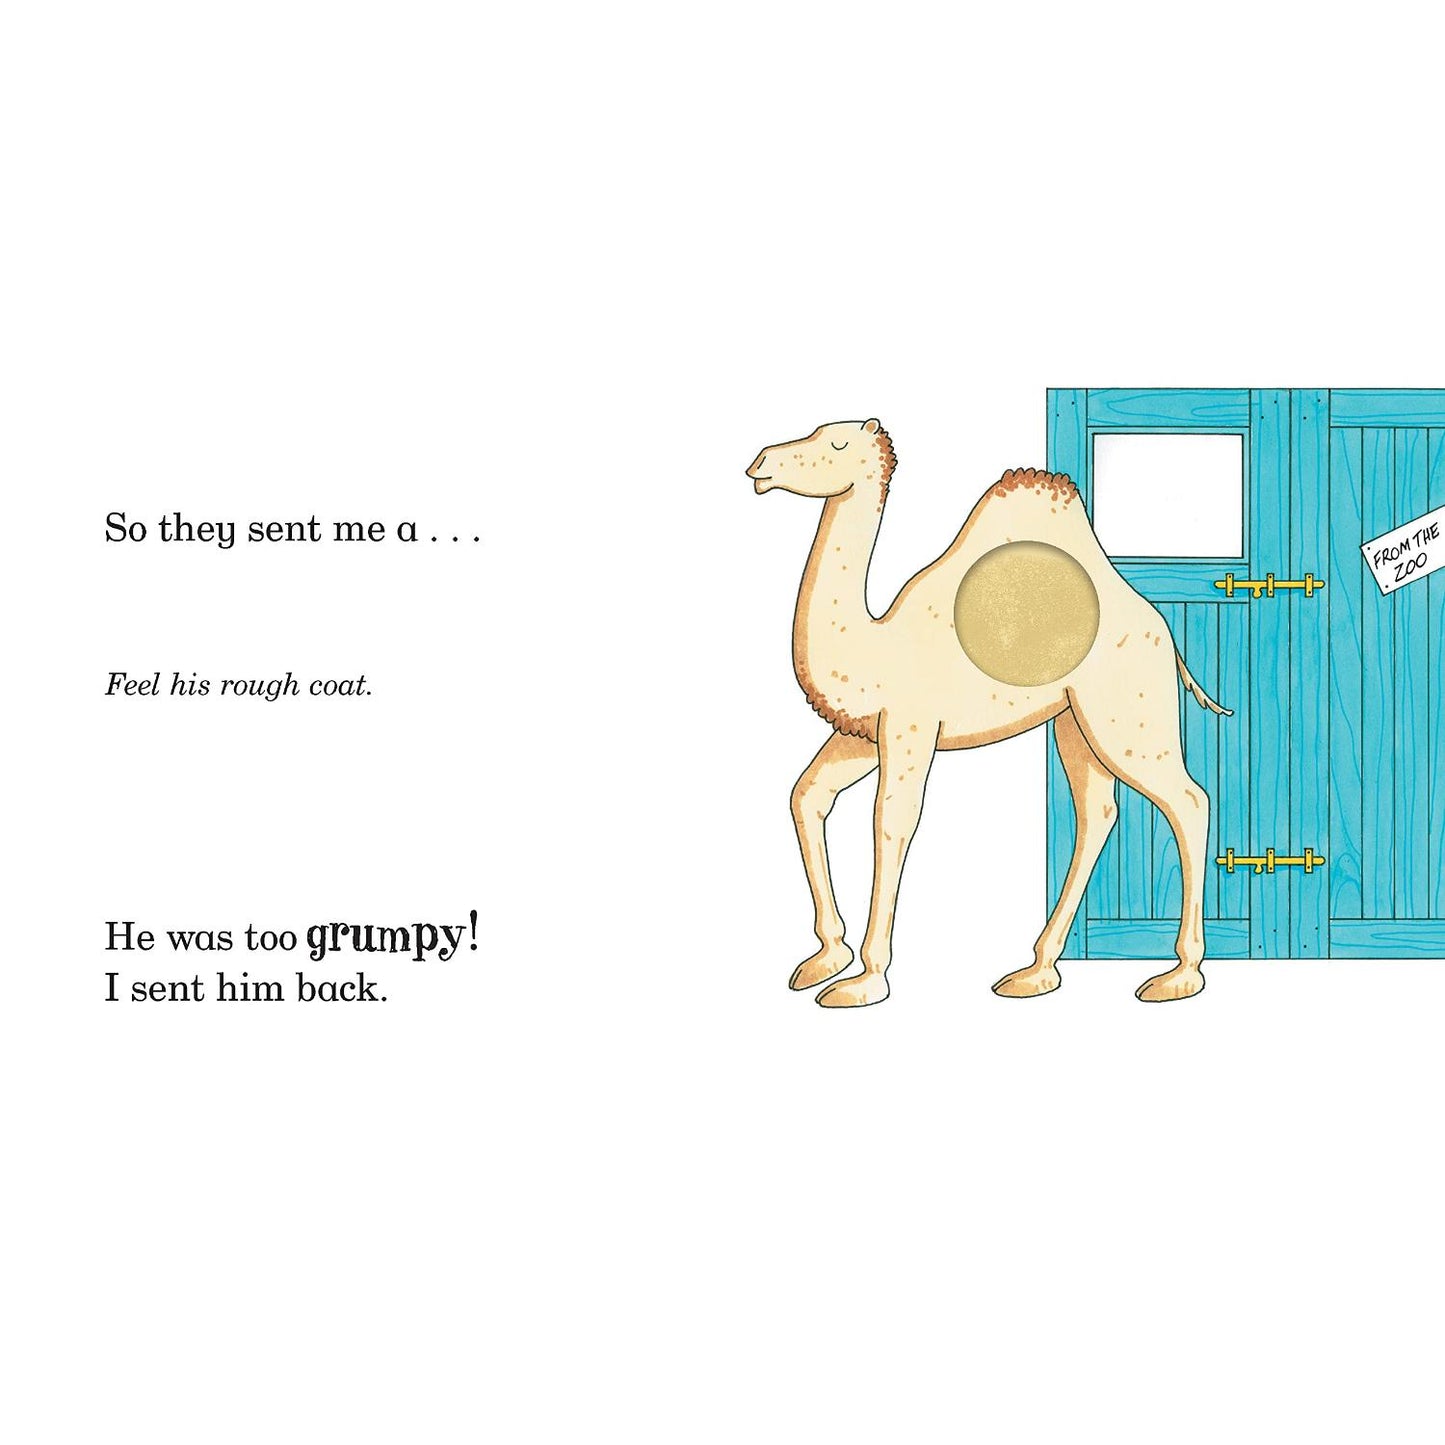 Dear Zoo | Children's Touch and Feel Board Book